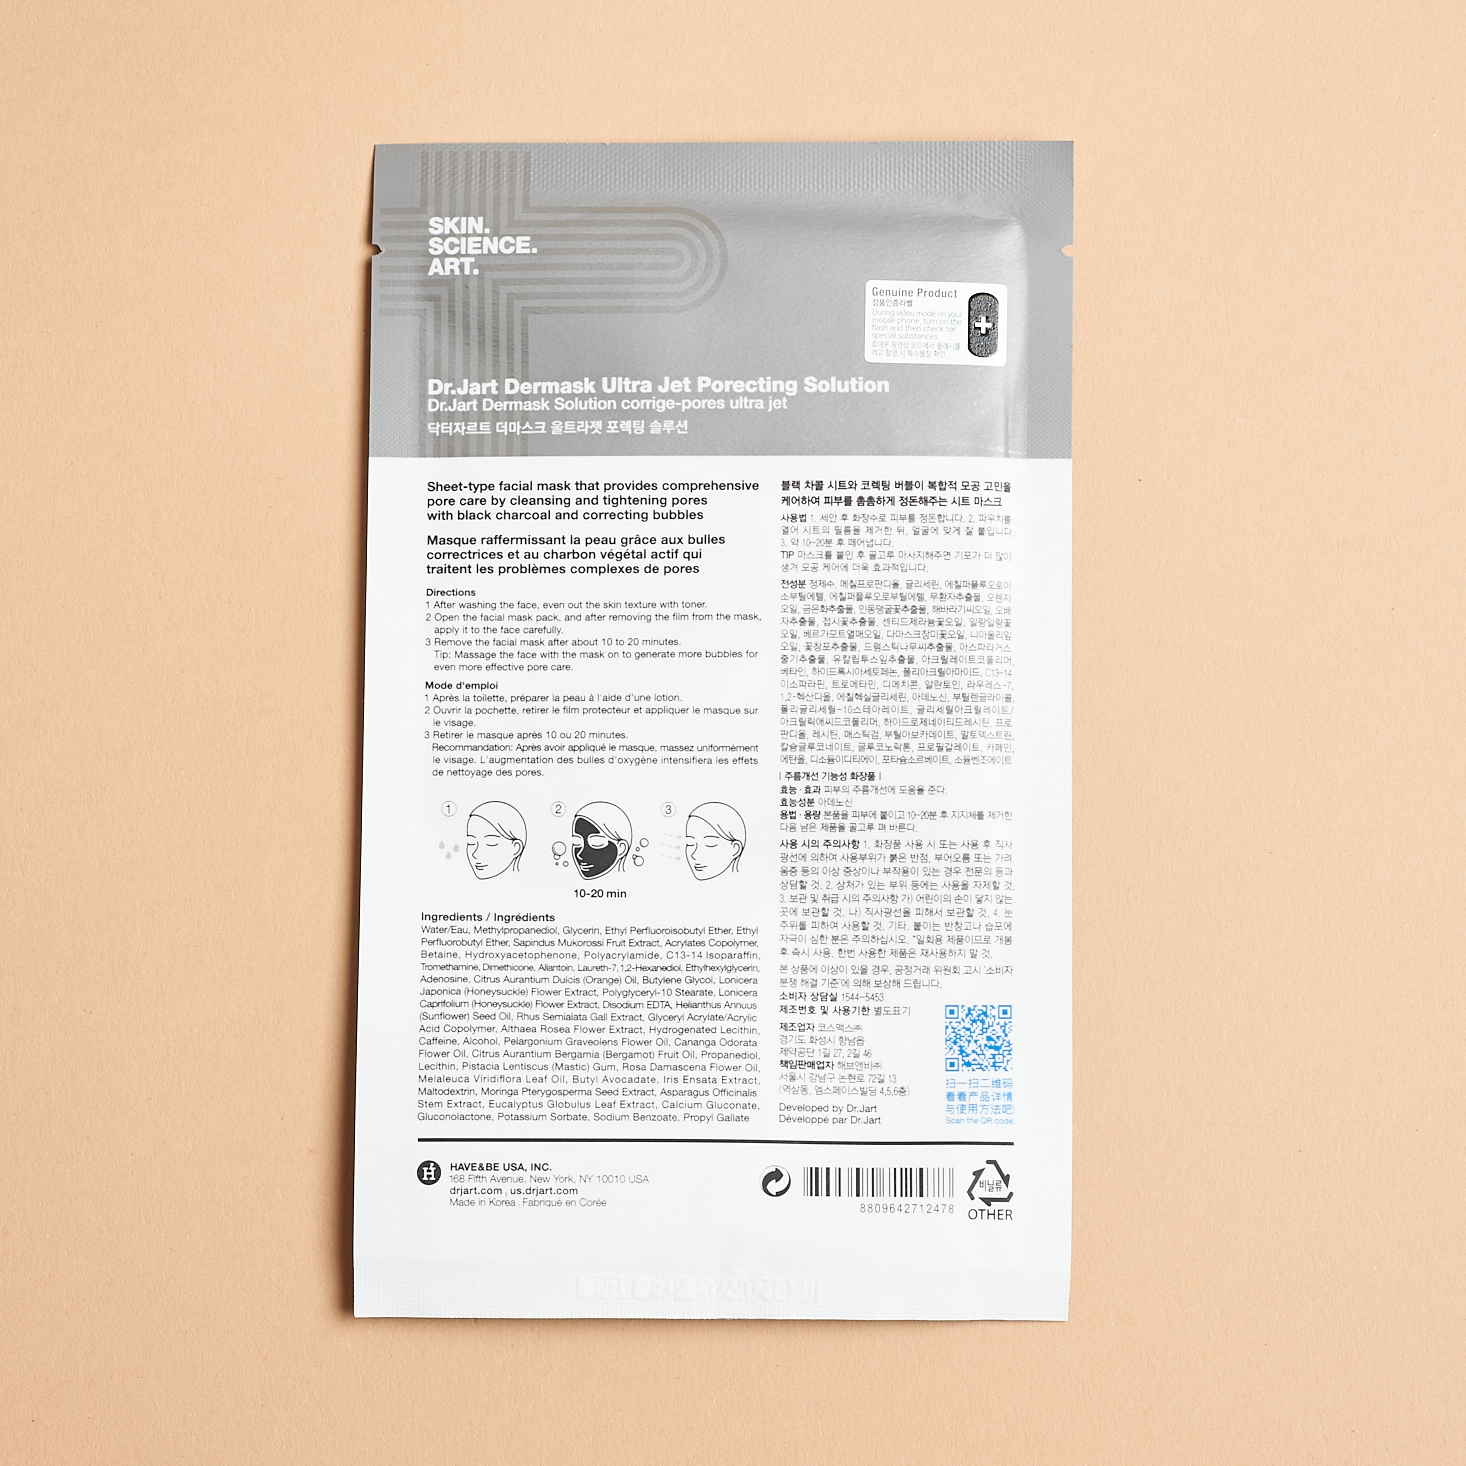 grey and white sheet mask packaging with ingredients and instructions